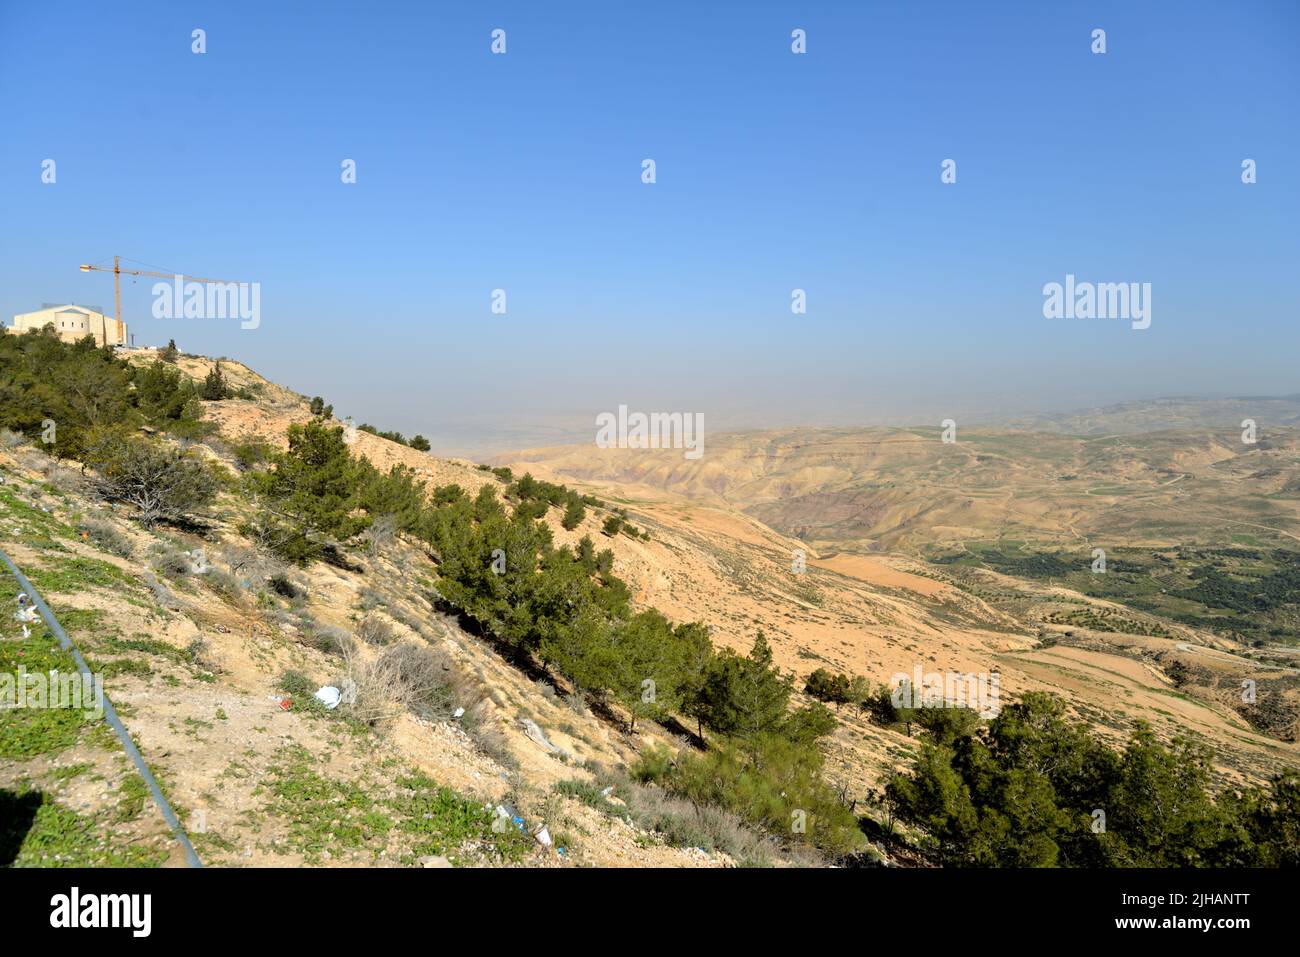 Memorial church of Moses on the top of mount Nebo in Jordan Stock Photo